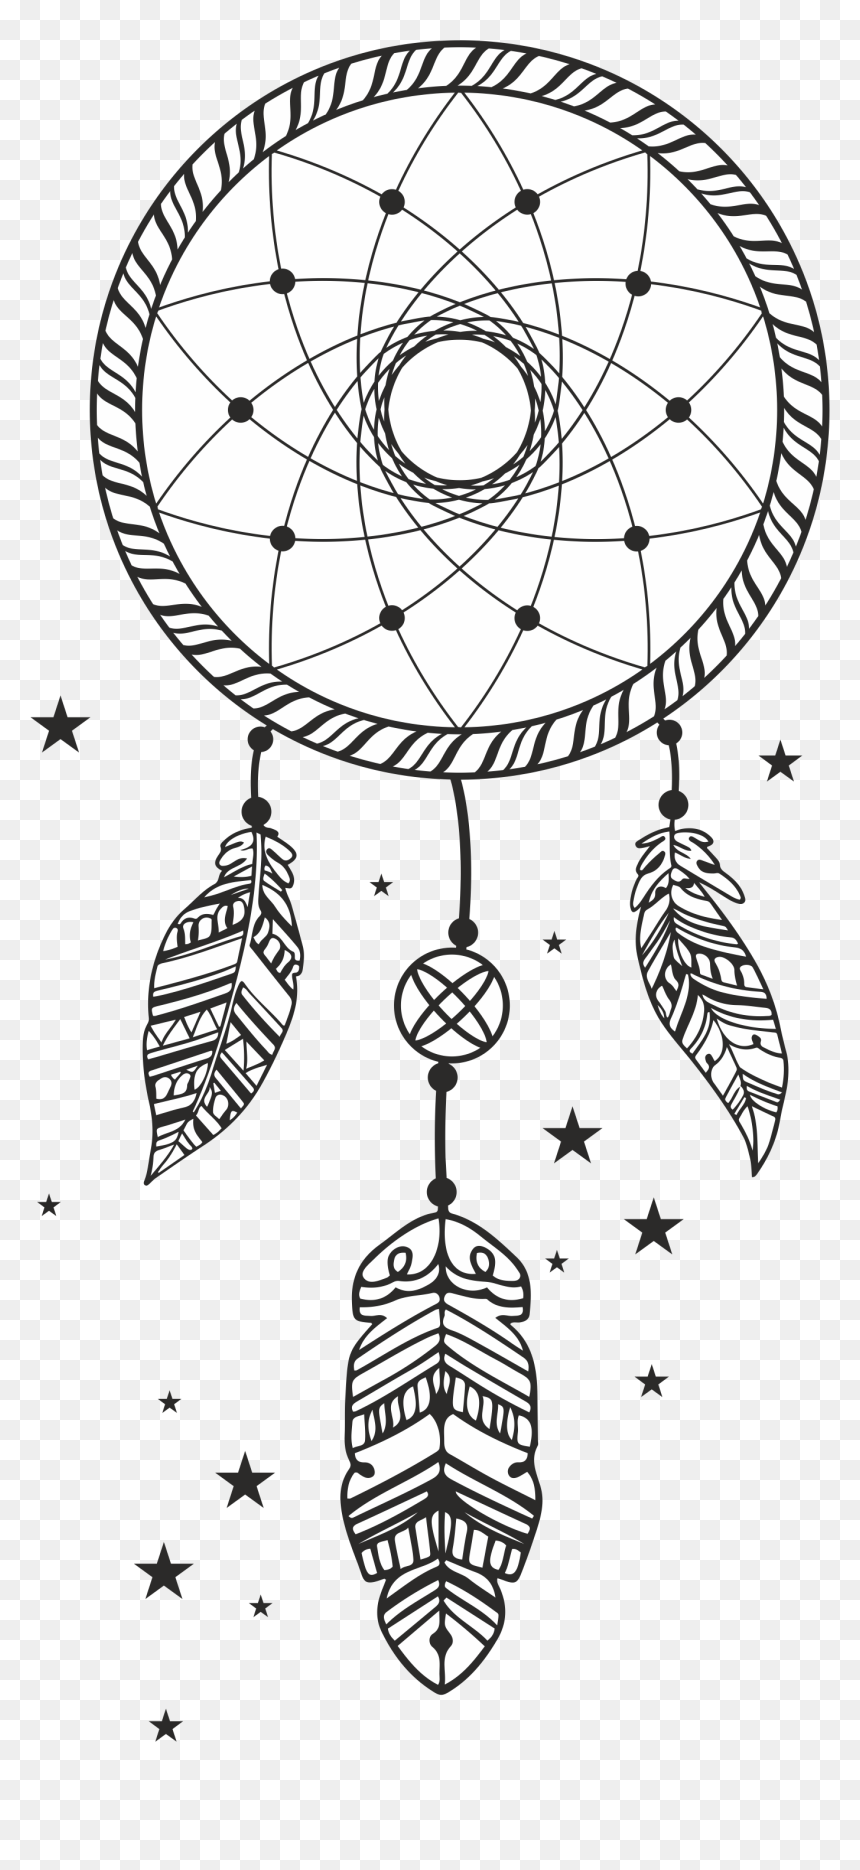 Dream Catcher, Dreamcatcher, Dreamcatcher Dream Catcher, Drawing - Clip ...